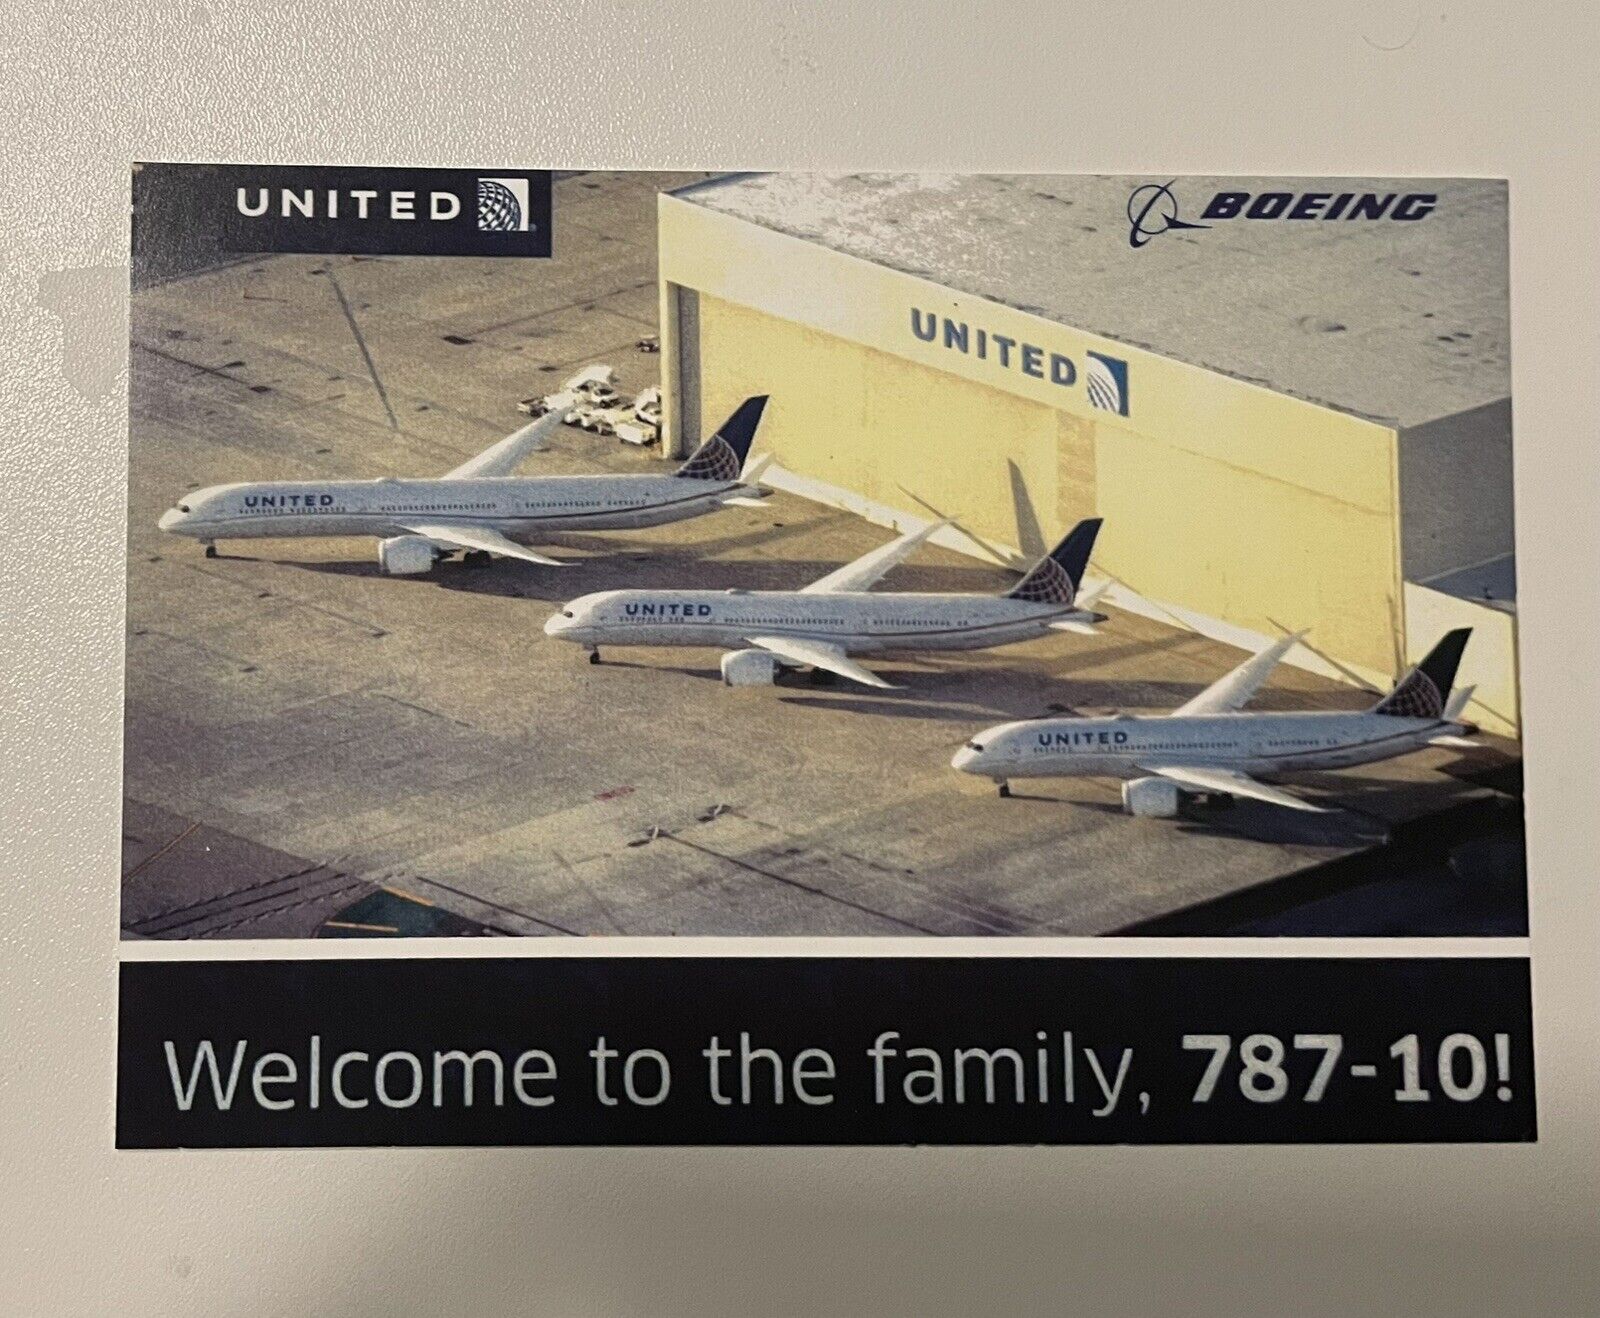 United Airlines Boeing 787-10 Welcome To The Family Card